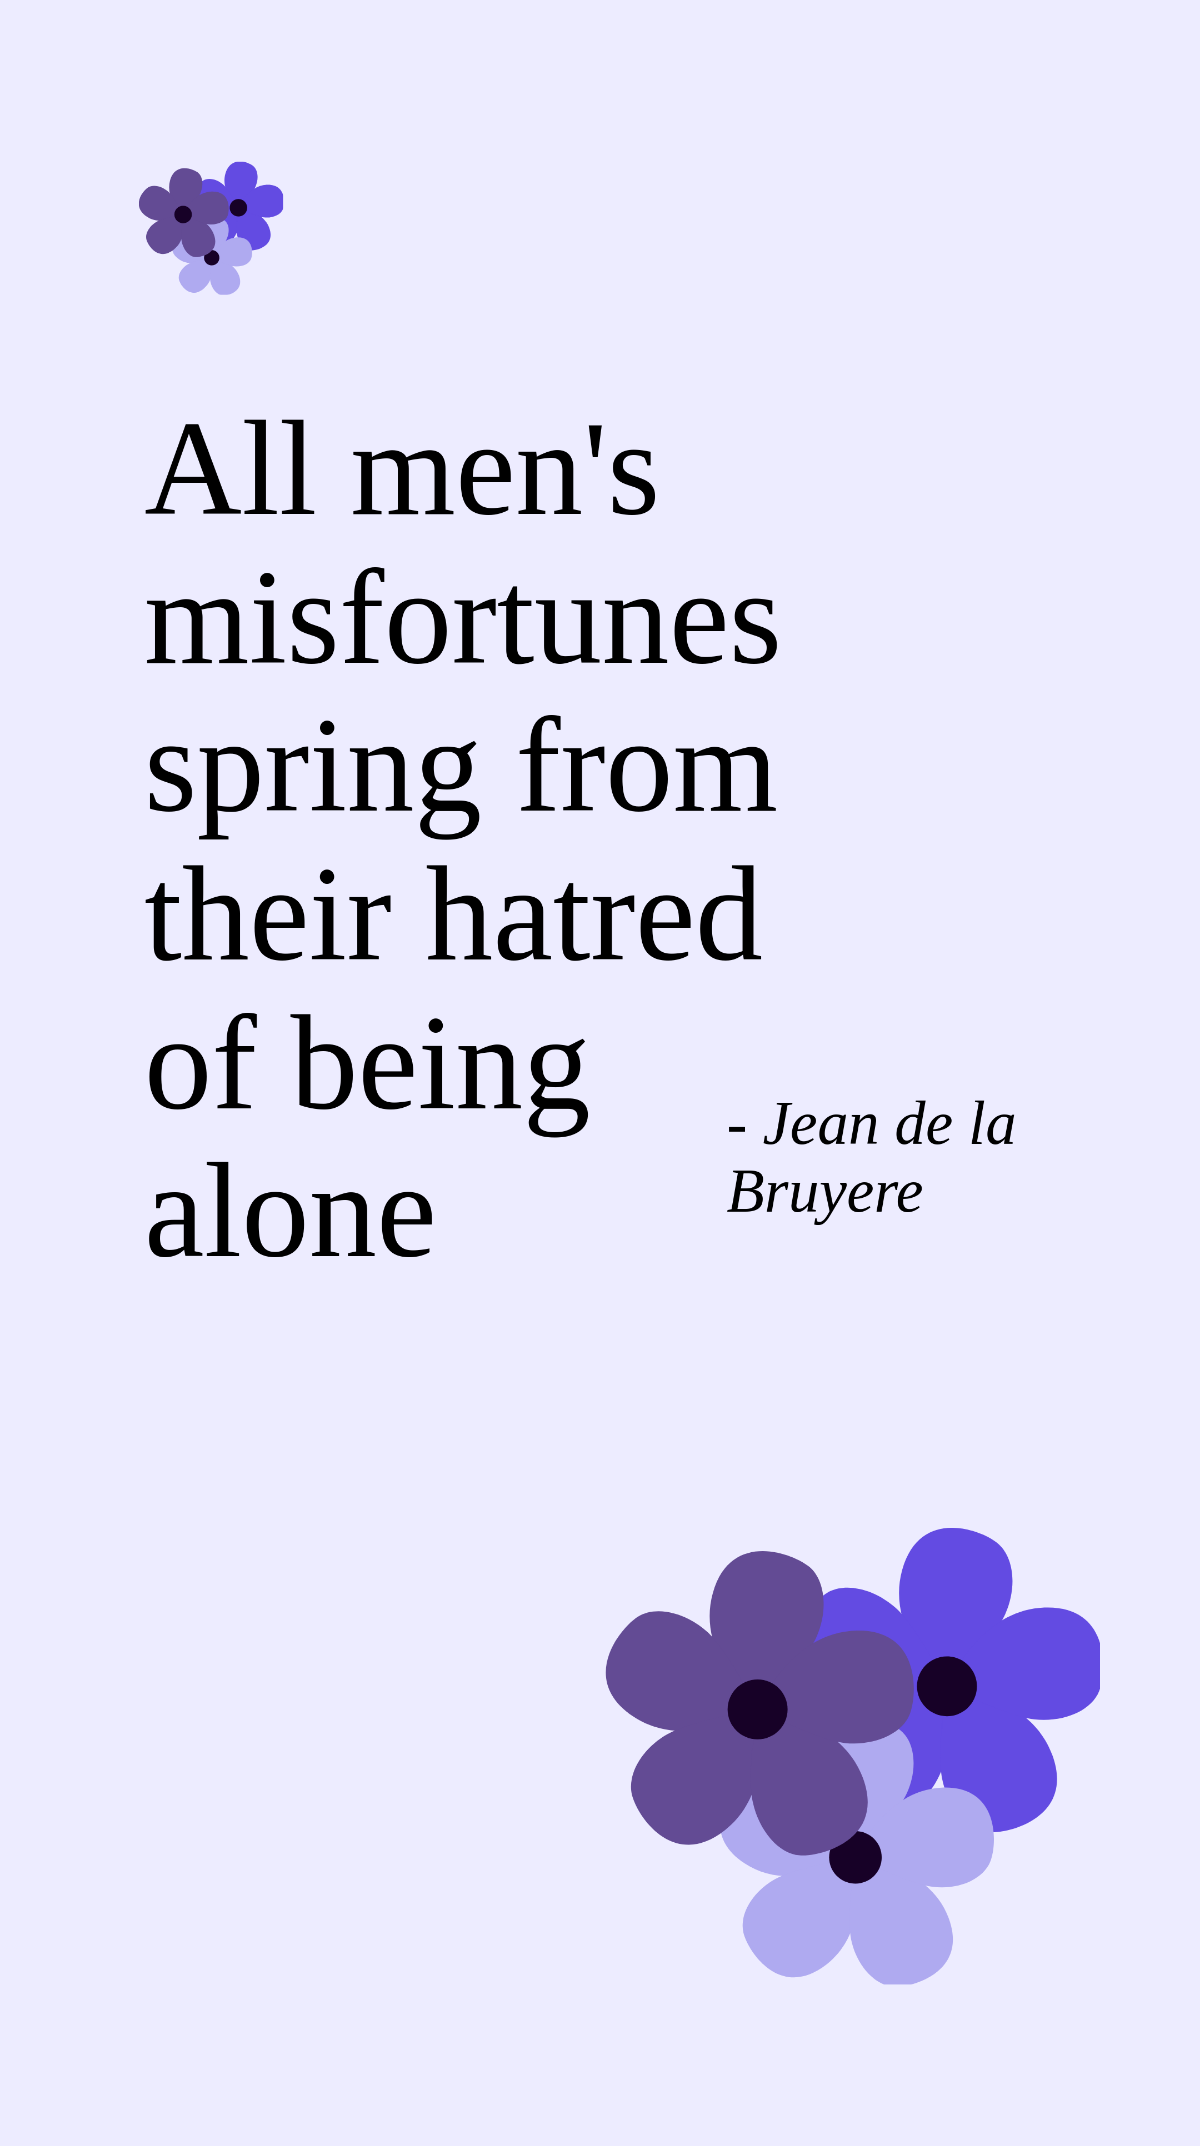 Free Jean de la Bruyere - All men's misfortunes spring from their hatred of being alone Template